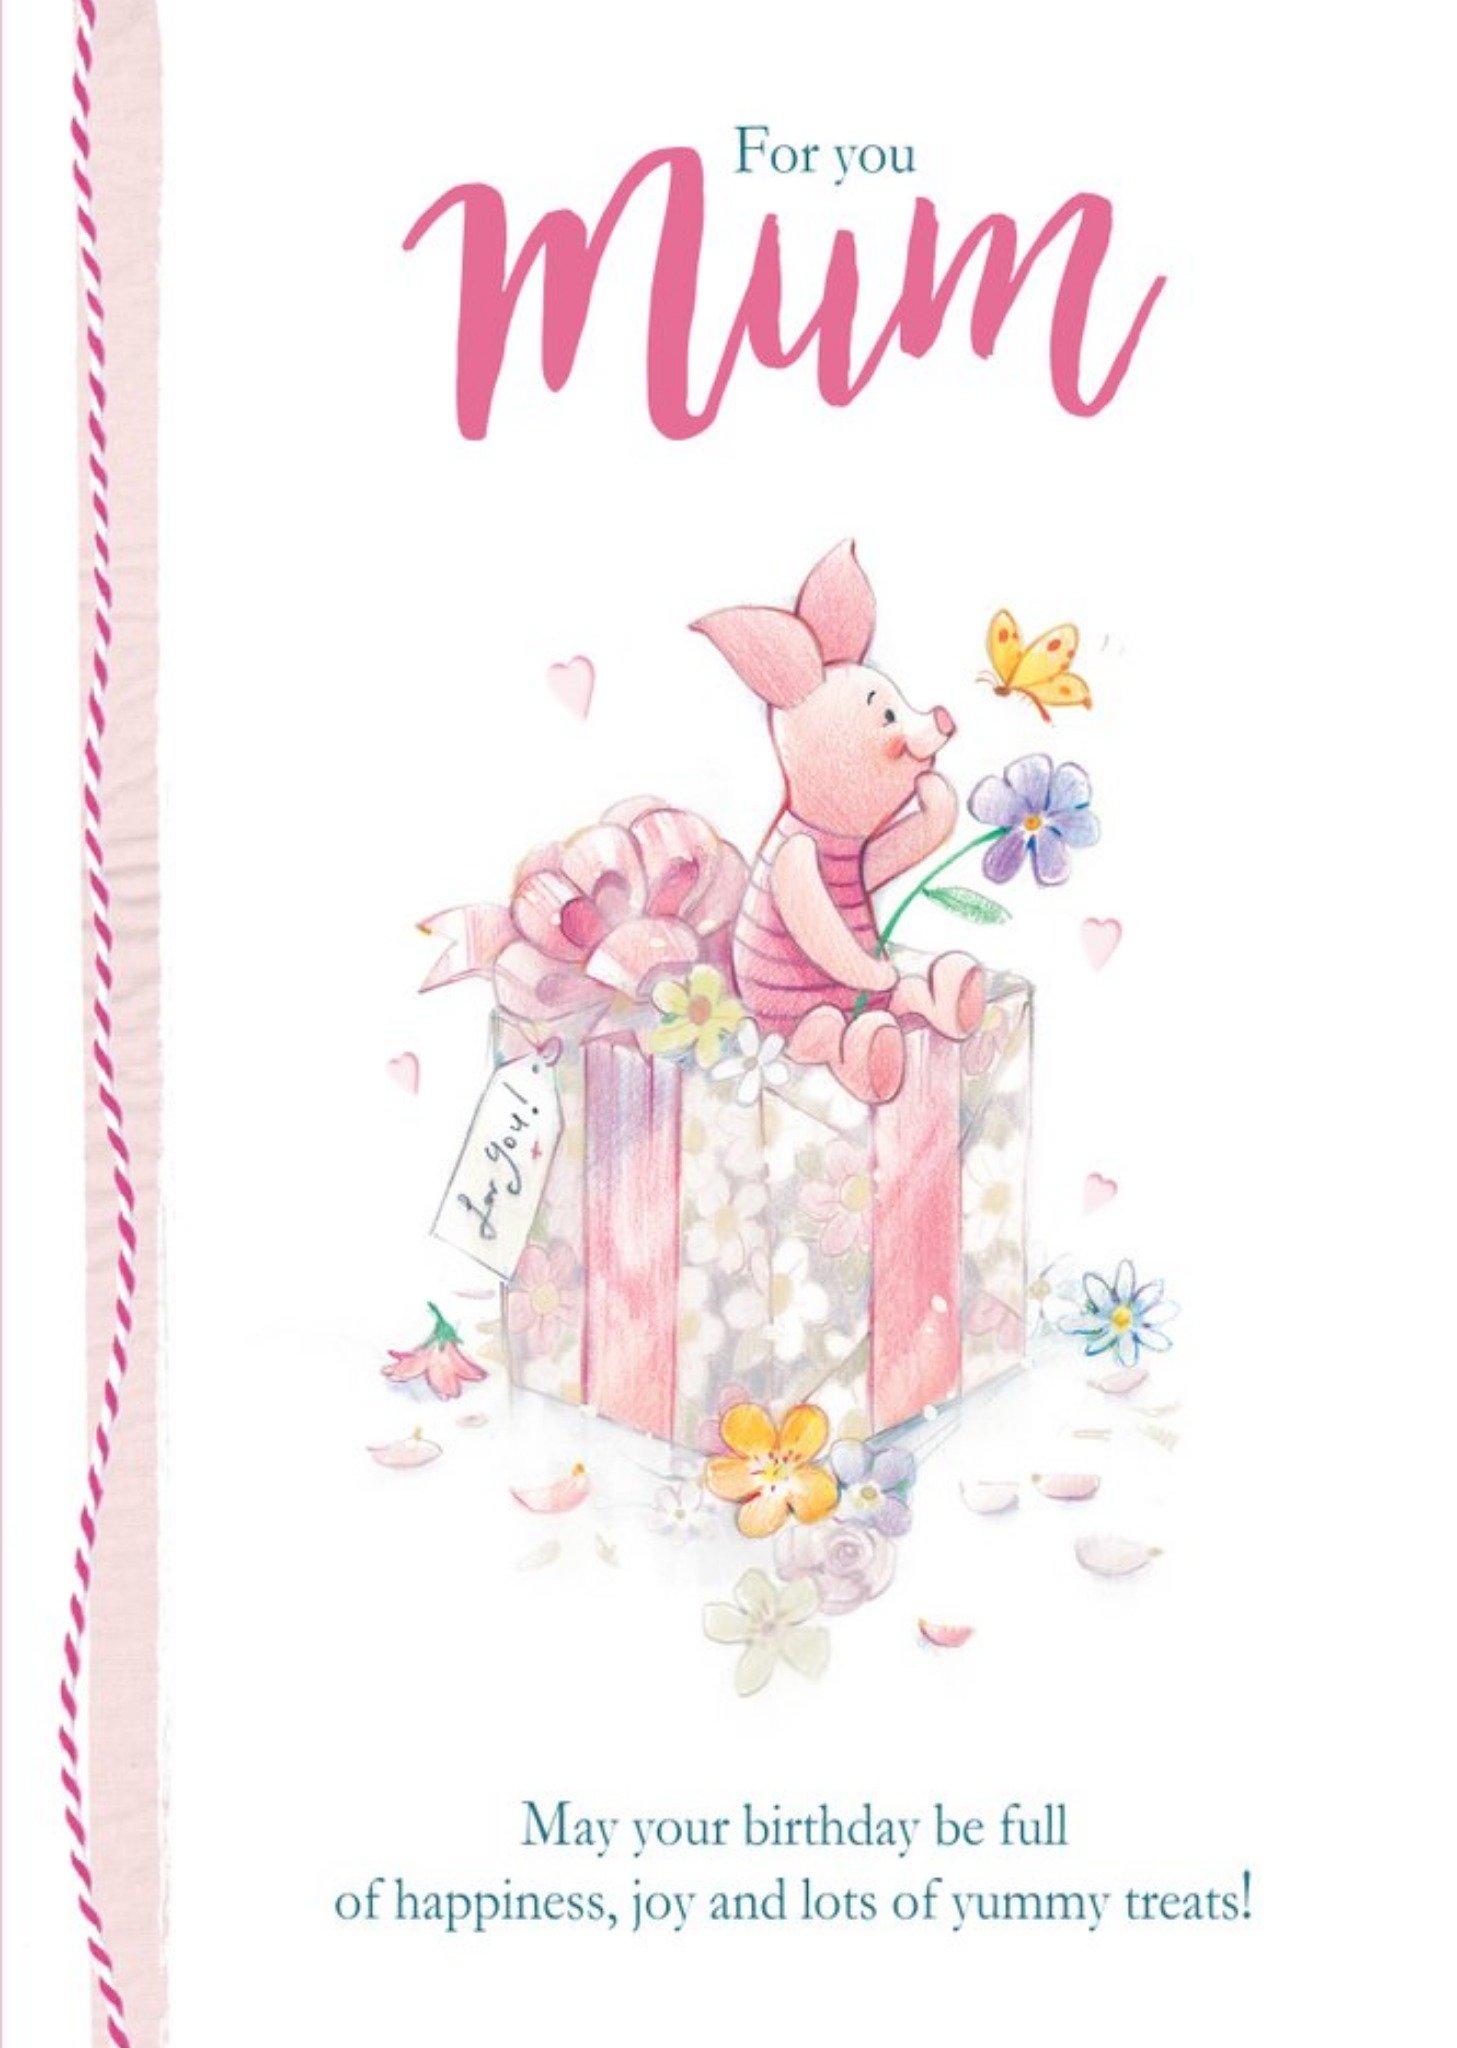 Birthday Card For Mum - Winnie The Pooh - Piglet, Large